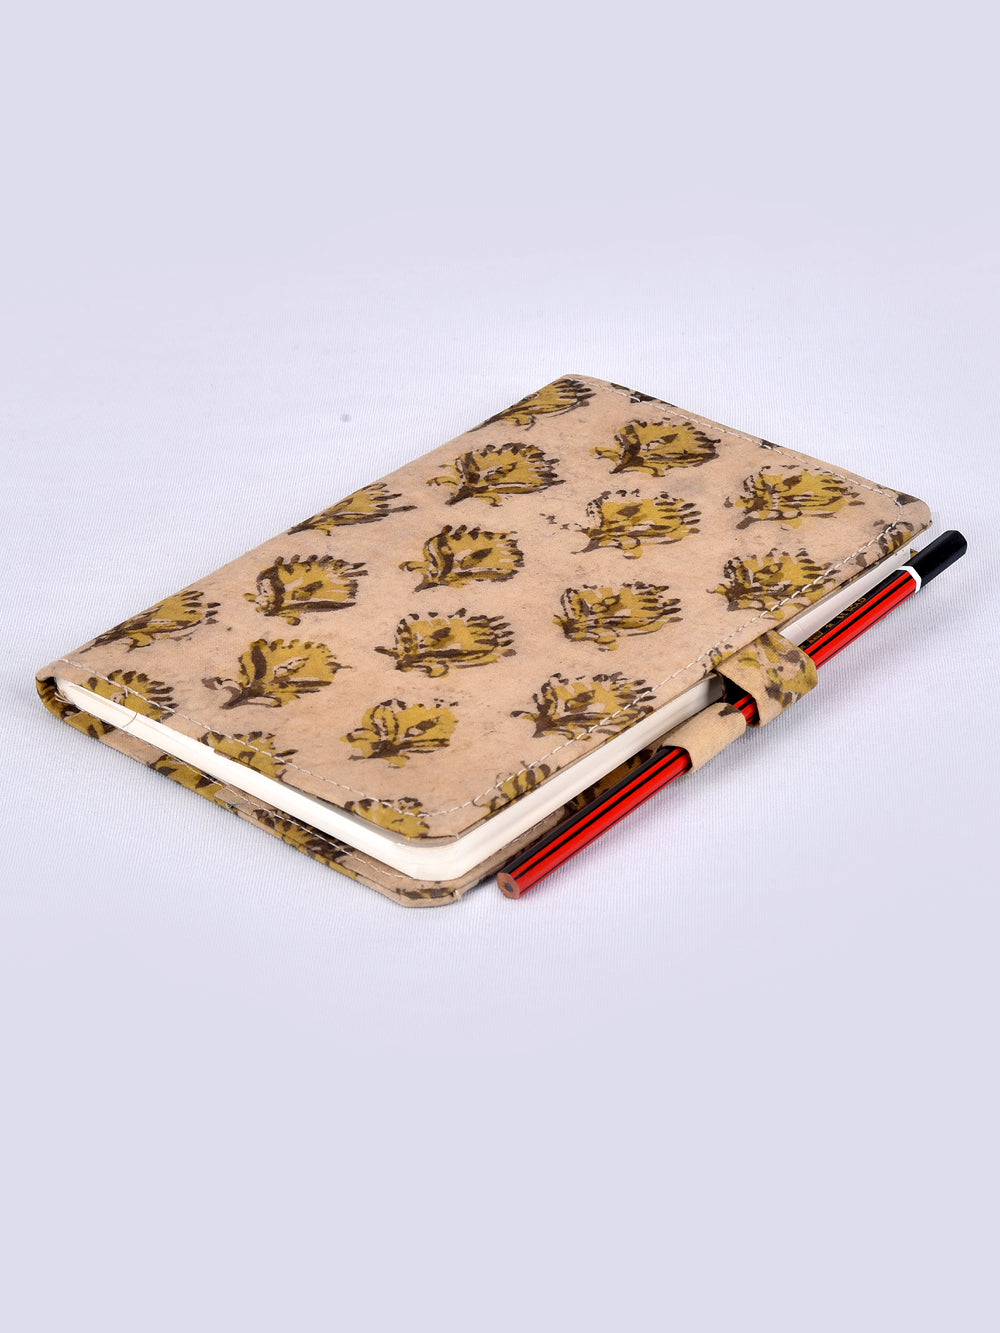 Traditional Ajrakh Booti Hand Block Printed Jot it Down Pencil Diary